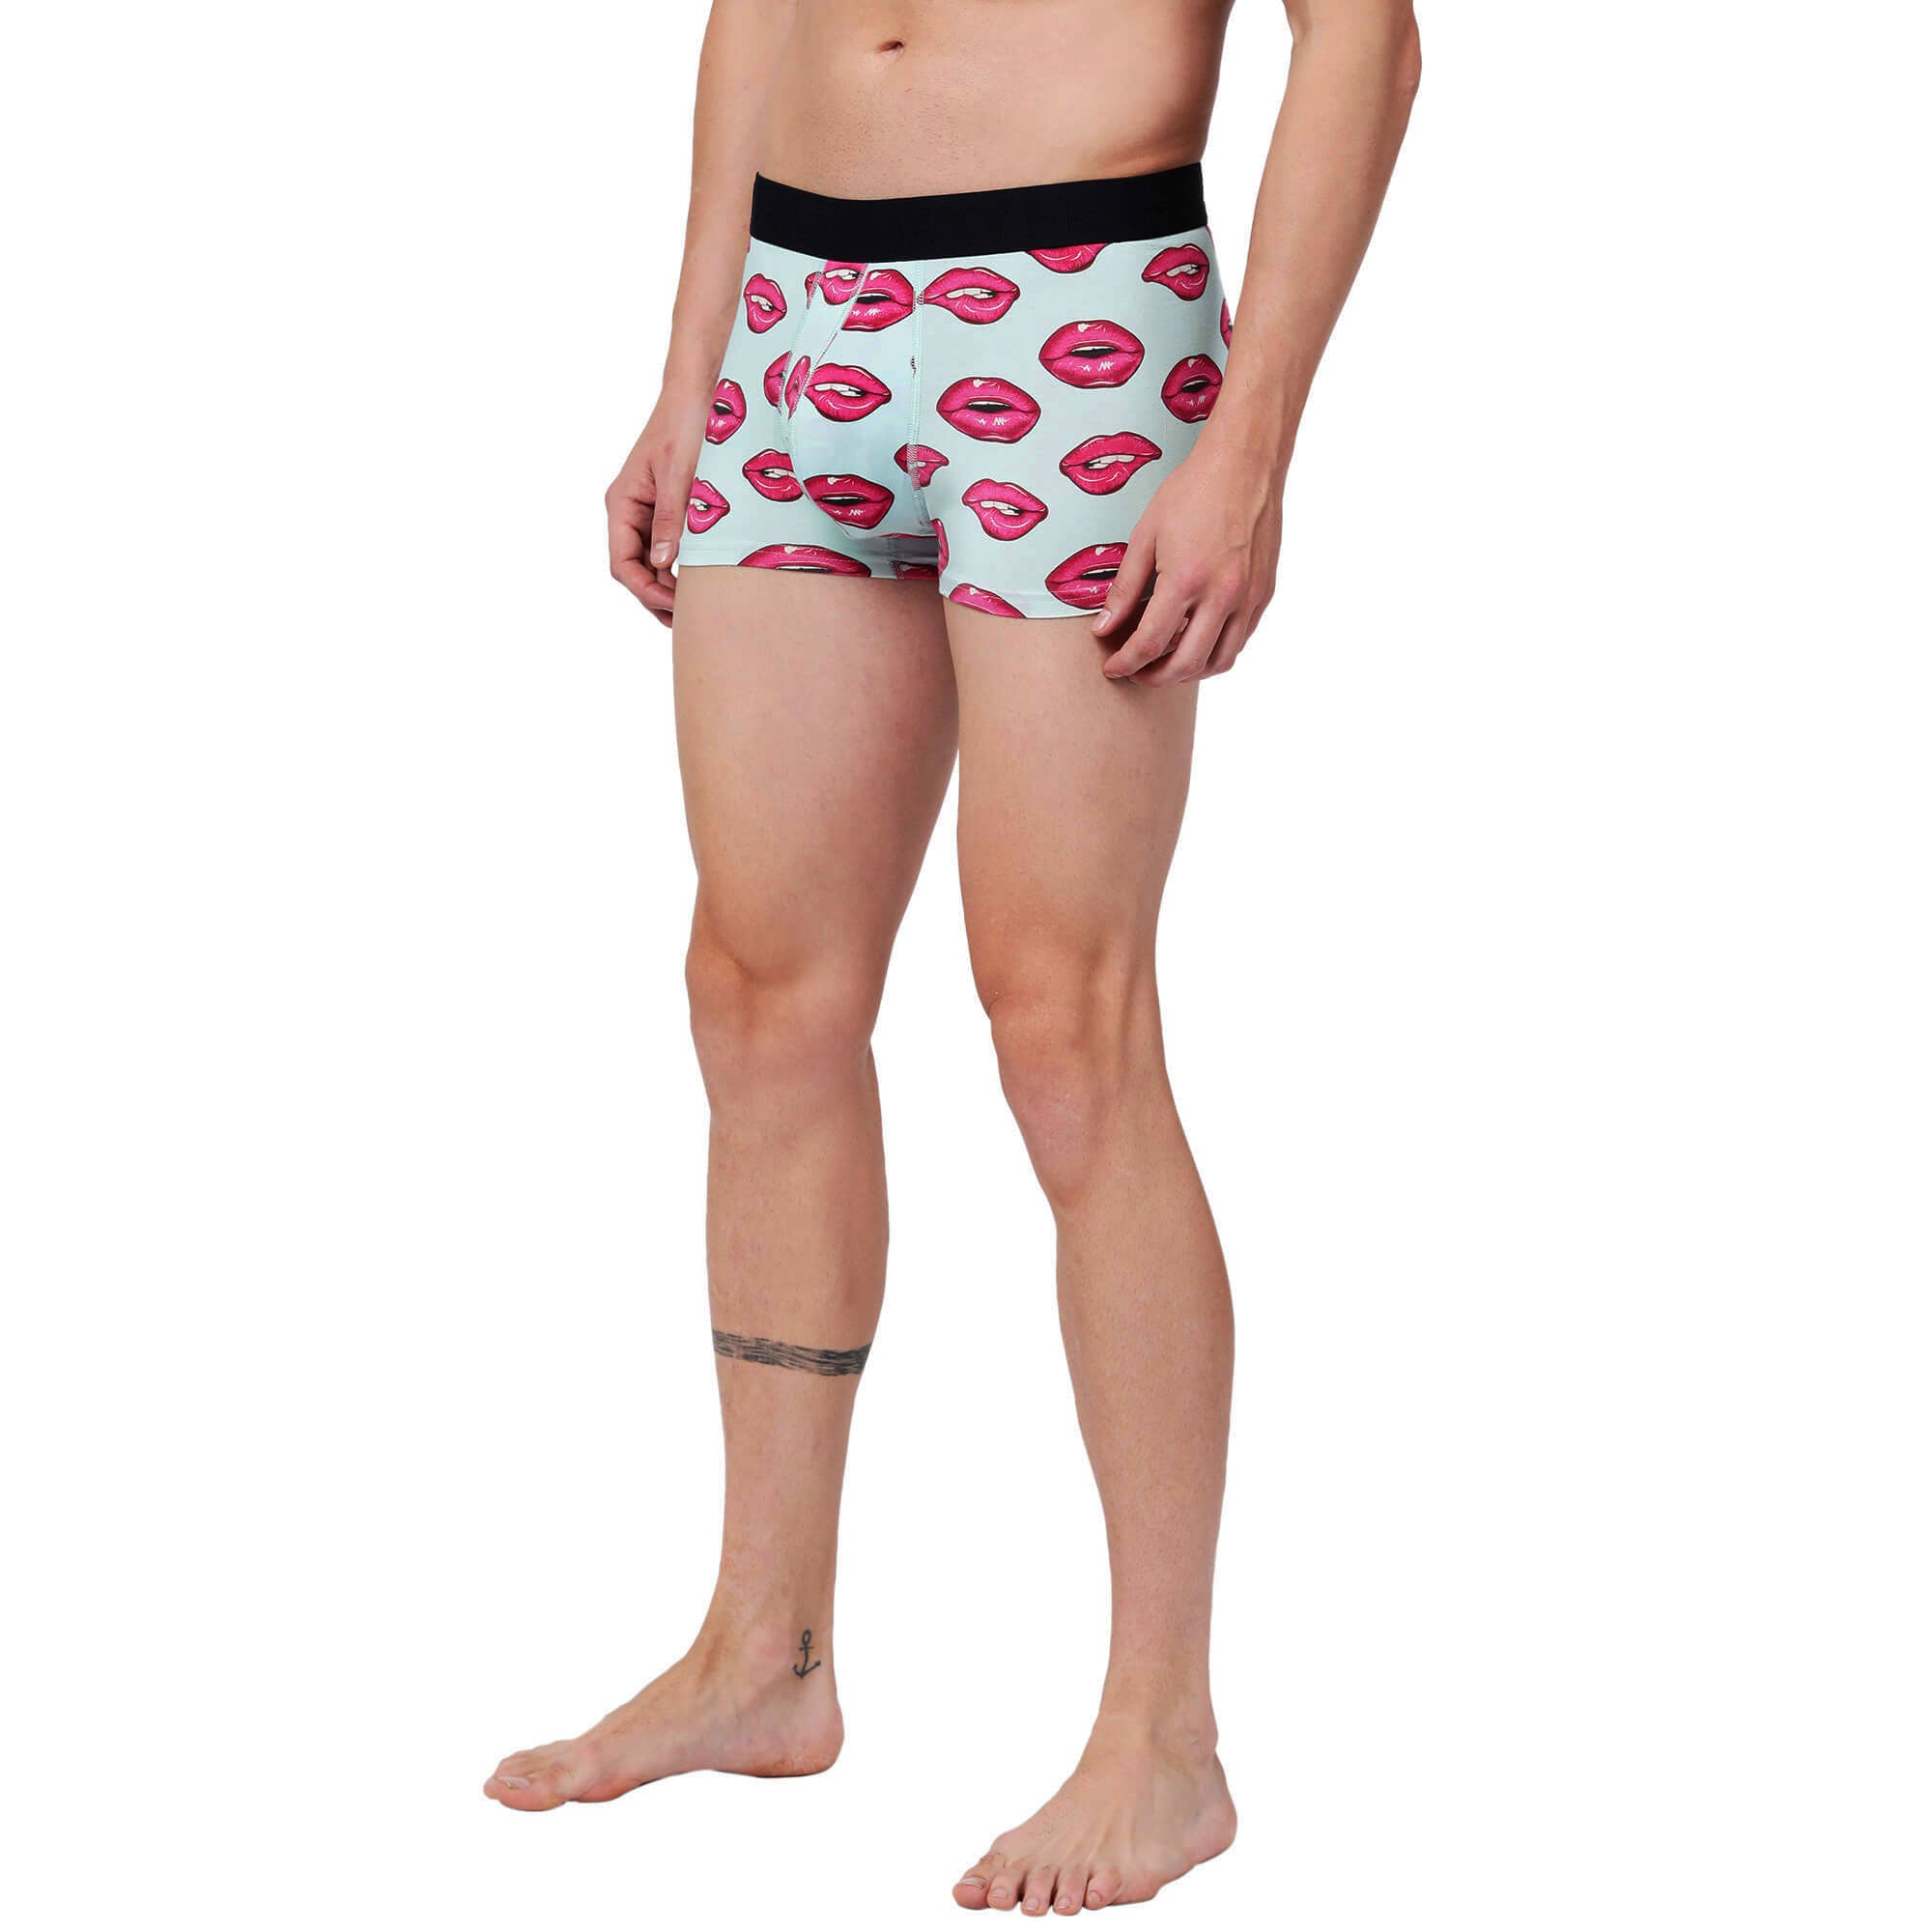 Sexy Stylish Printed Trunks for Men